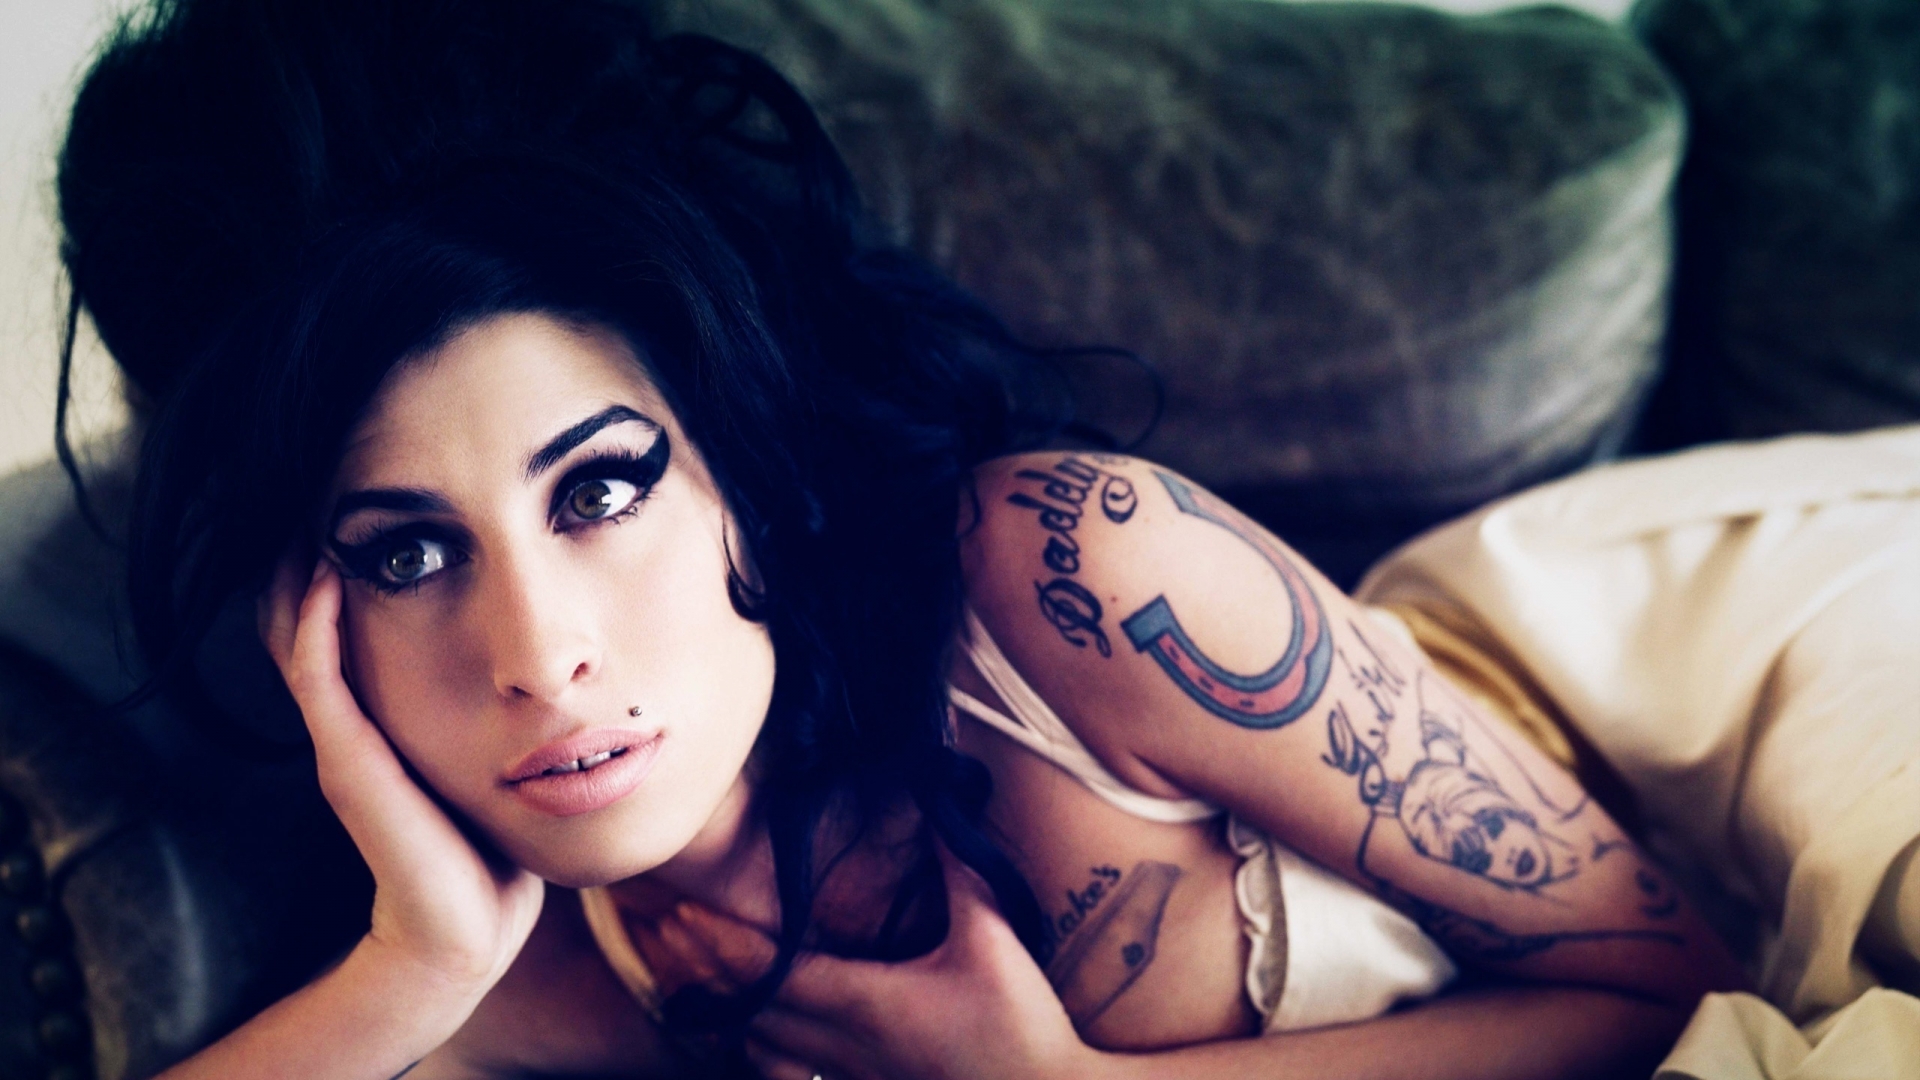 Beautiful Amy Winehouse for 1920 x 1080 HDTV 1080p resolution